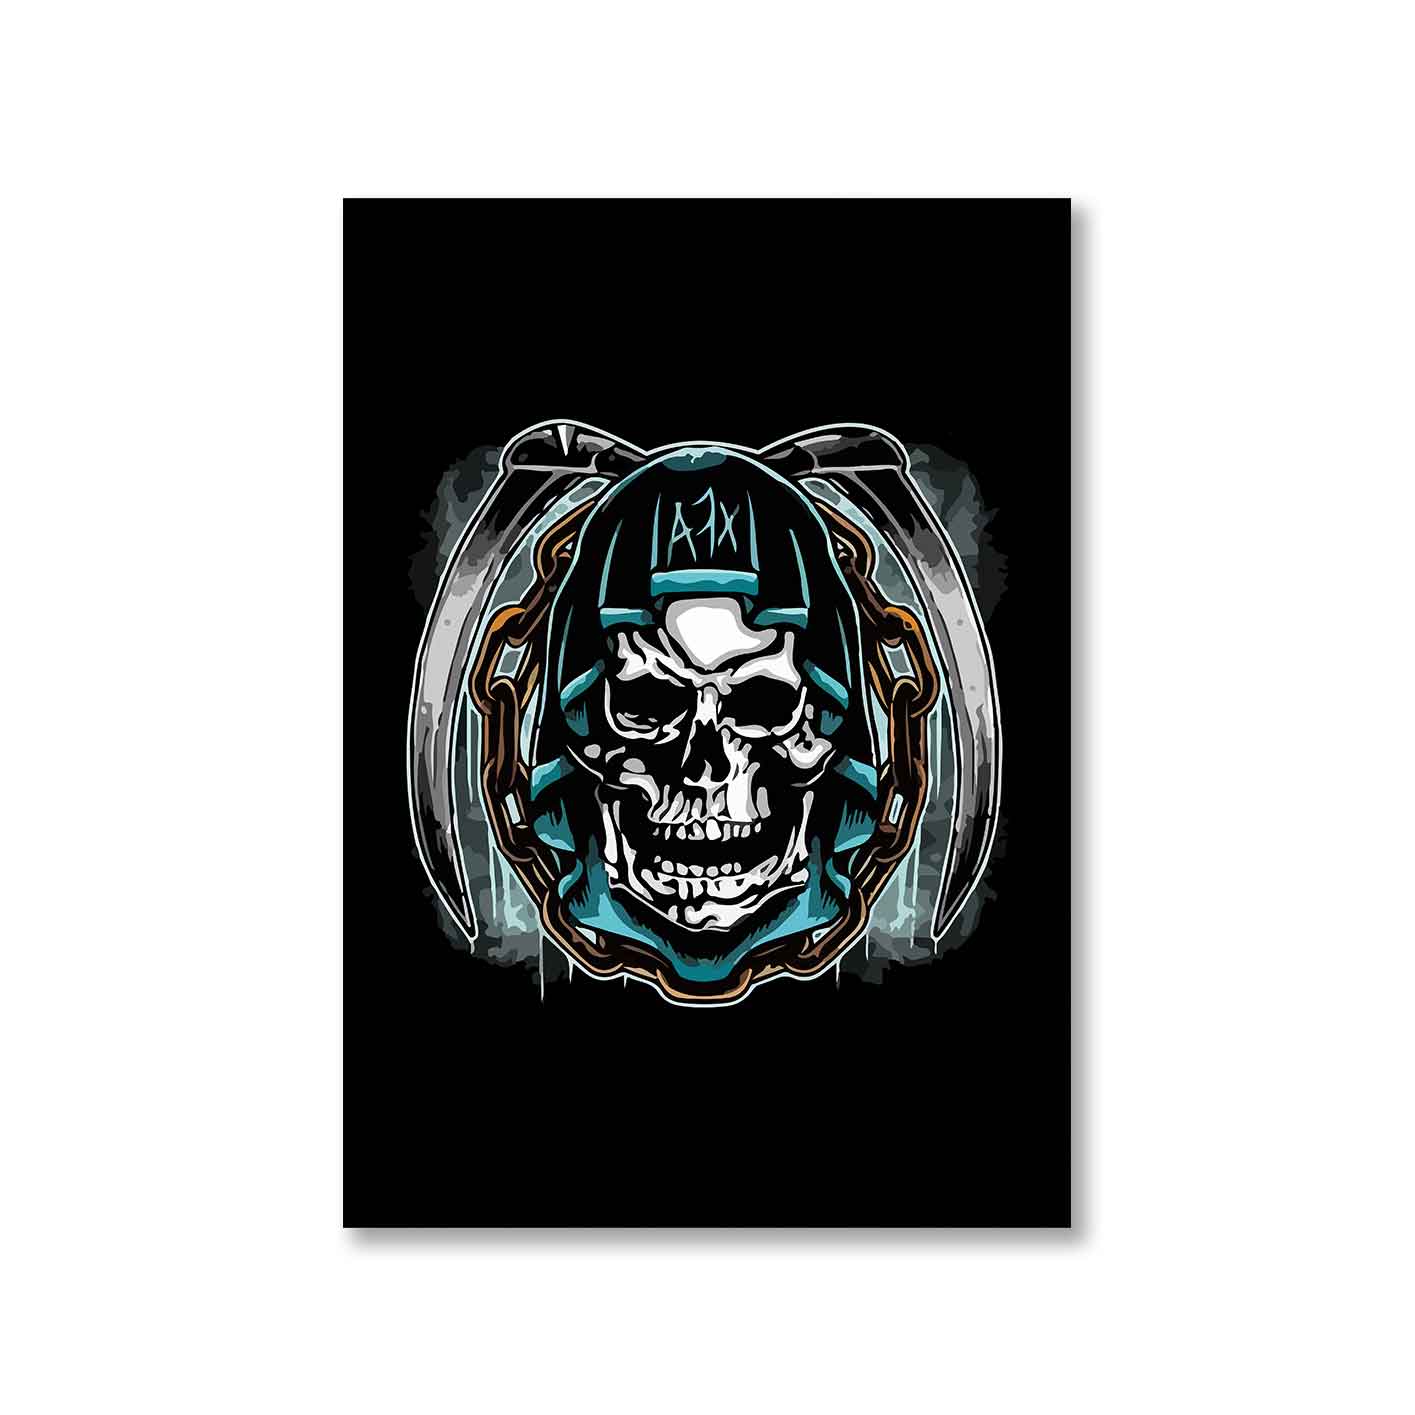 avenged sevenfold a7x poster wall art buy online india the banyan tee tbt a4